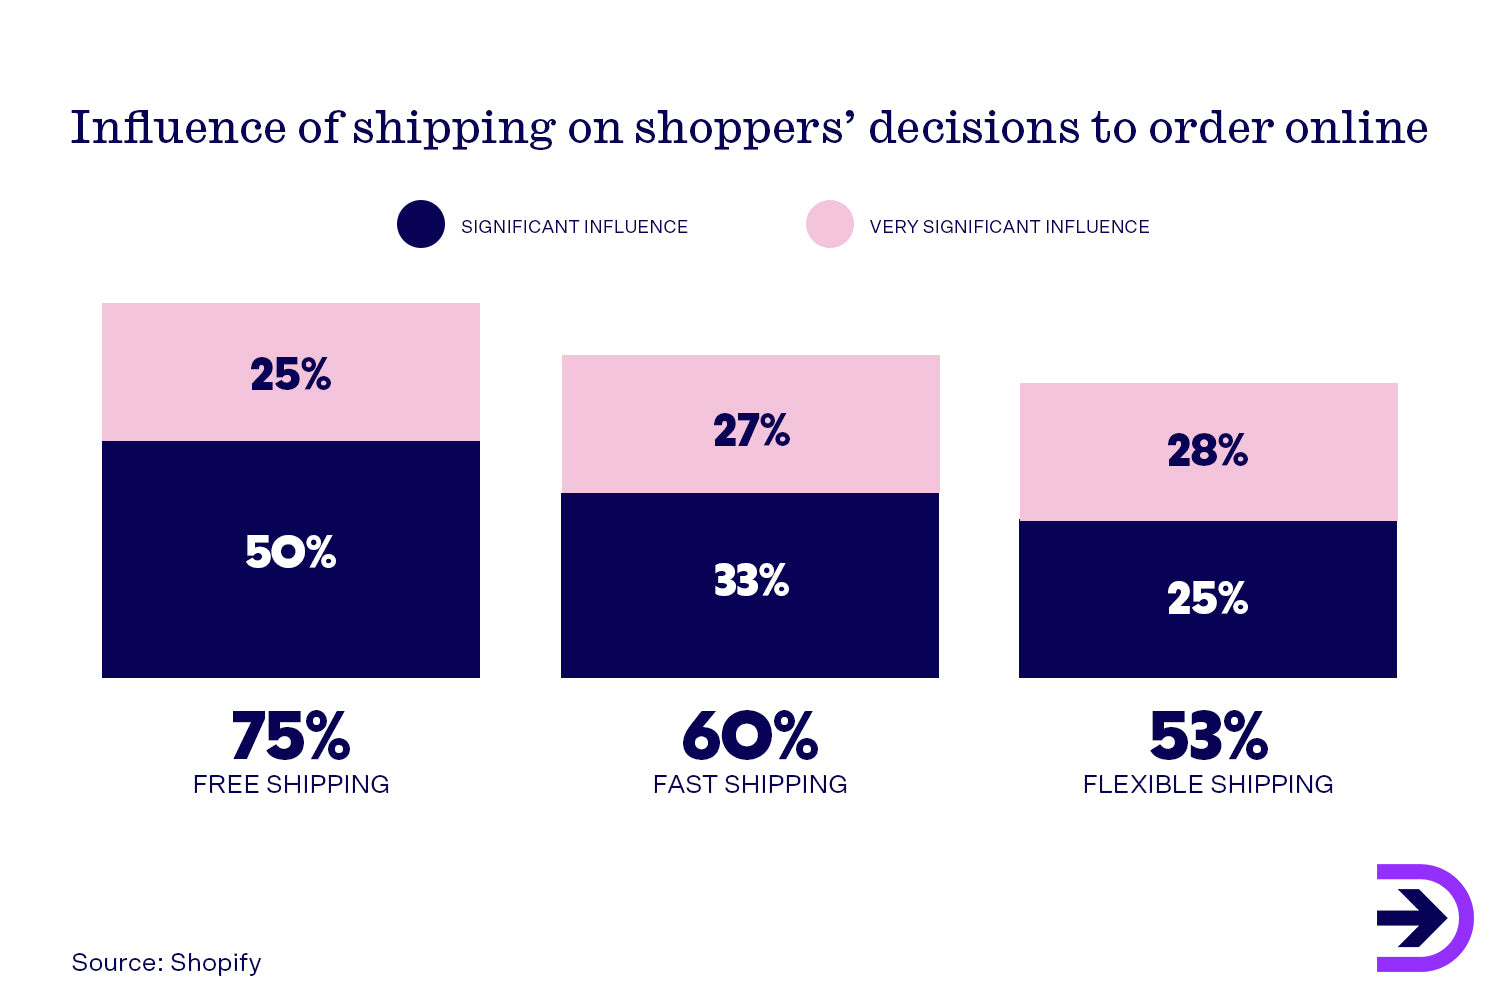 Fast and free shipping is becoming the new standard for consumers while retailers struggle to meet demand.